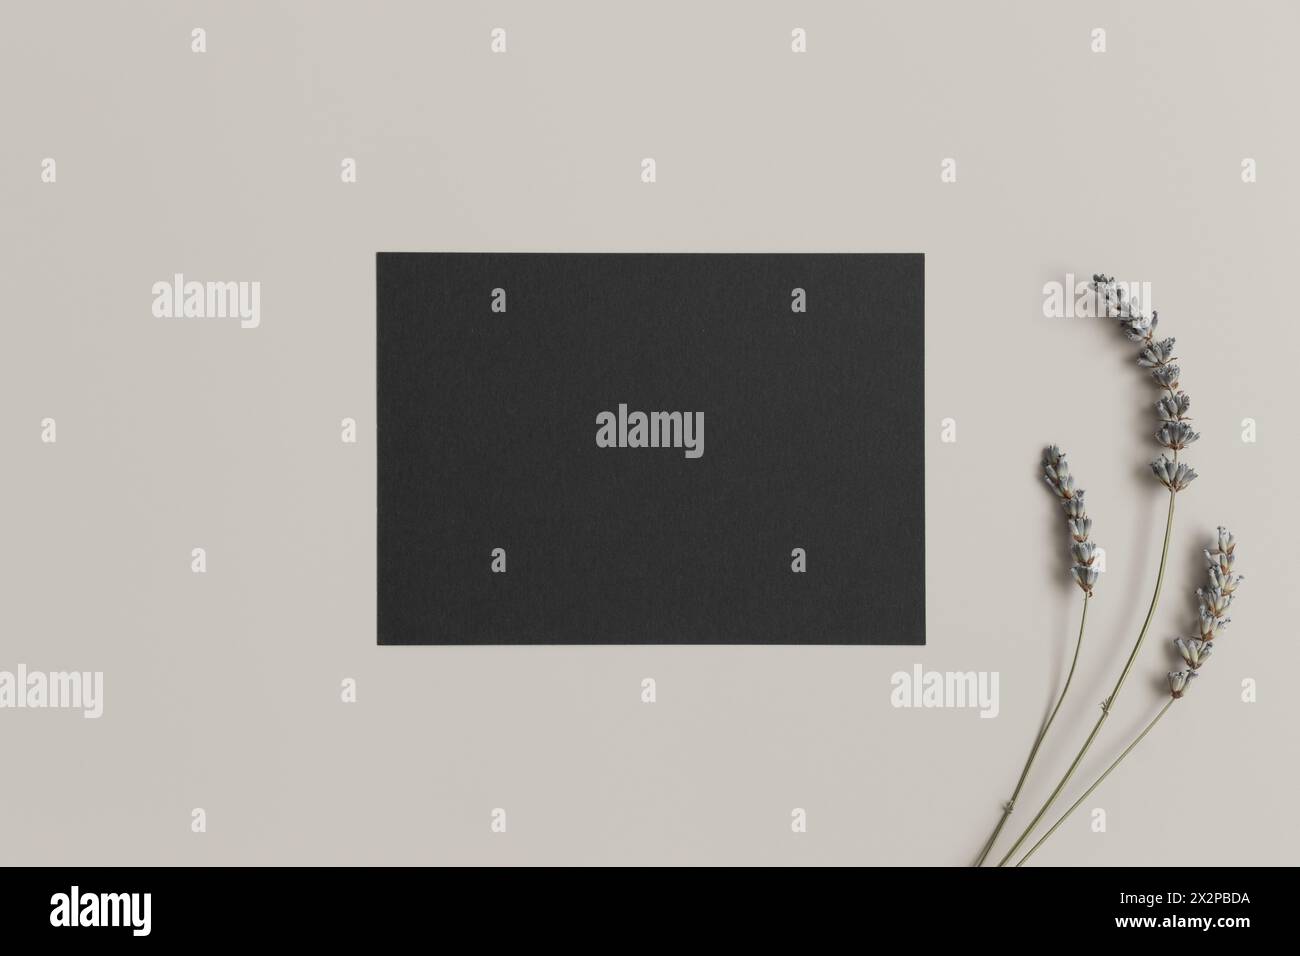 Invitation black card mockup with lavender. 5x7 ratio, similar to A6, A5. Stock Photo